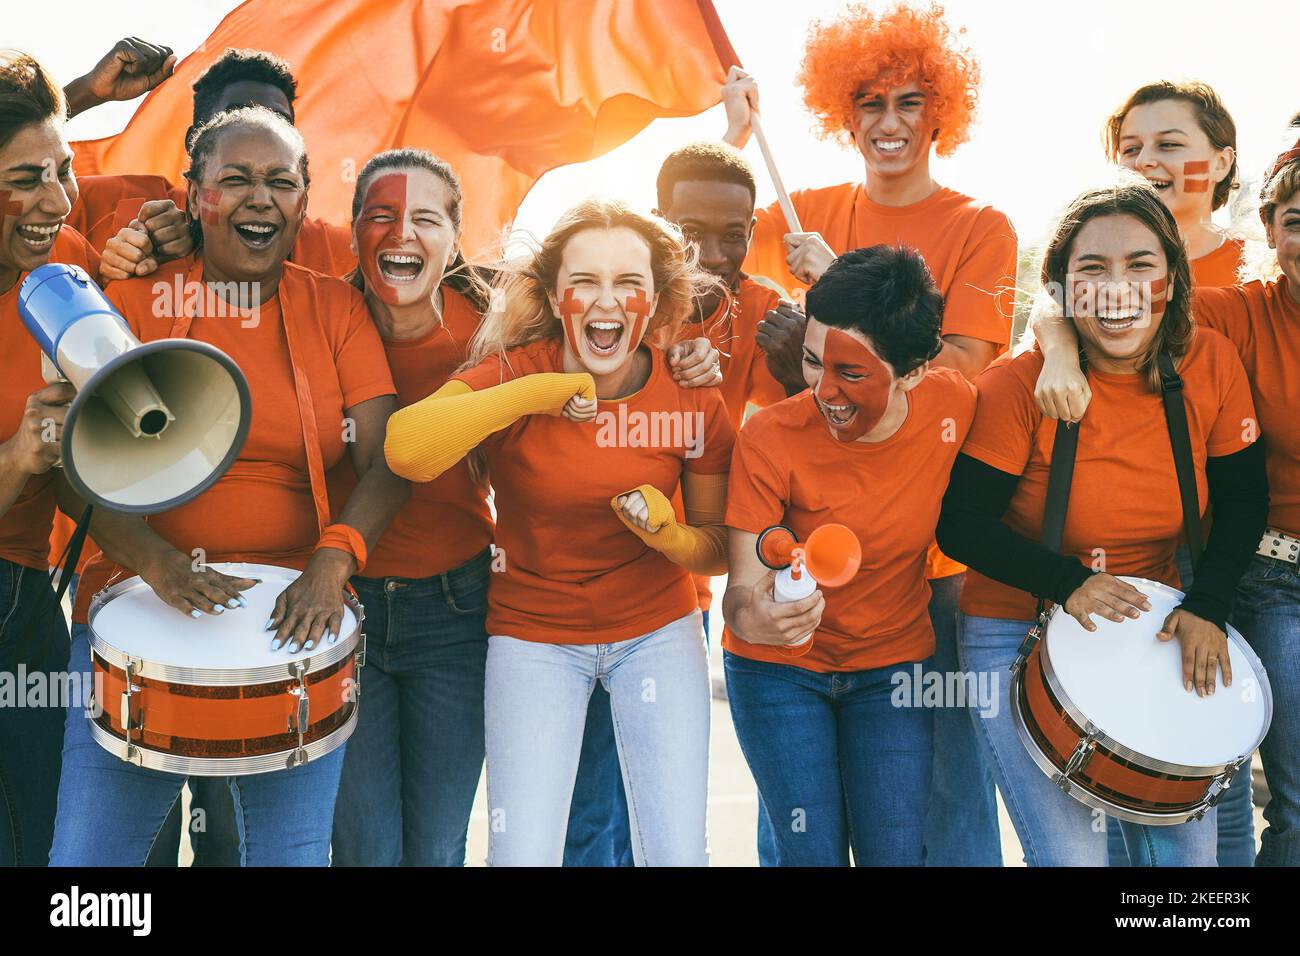 Multiracial sport fans screaming while supporting their team - Football supporters having fun at competition event - Focus on center girl face Stock Photo